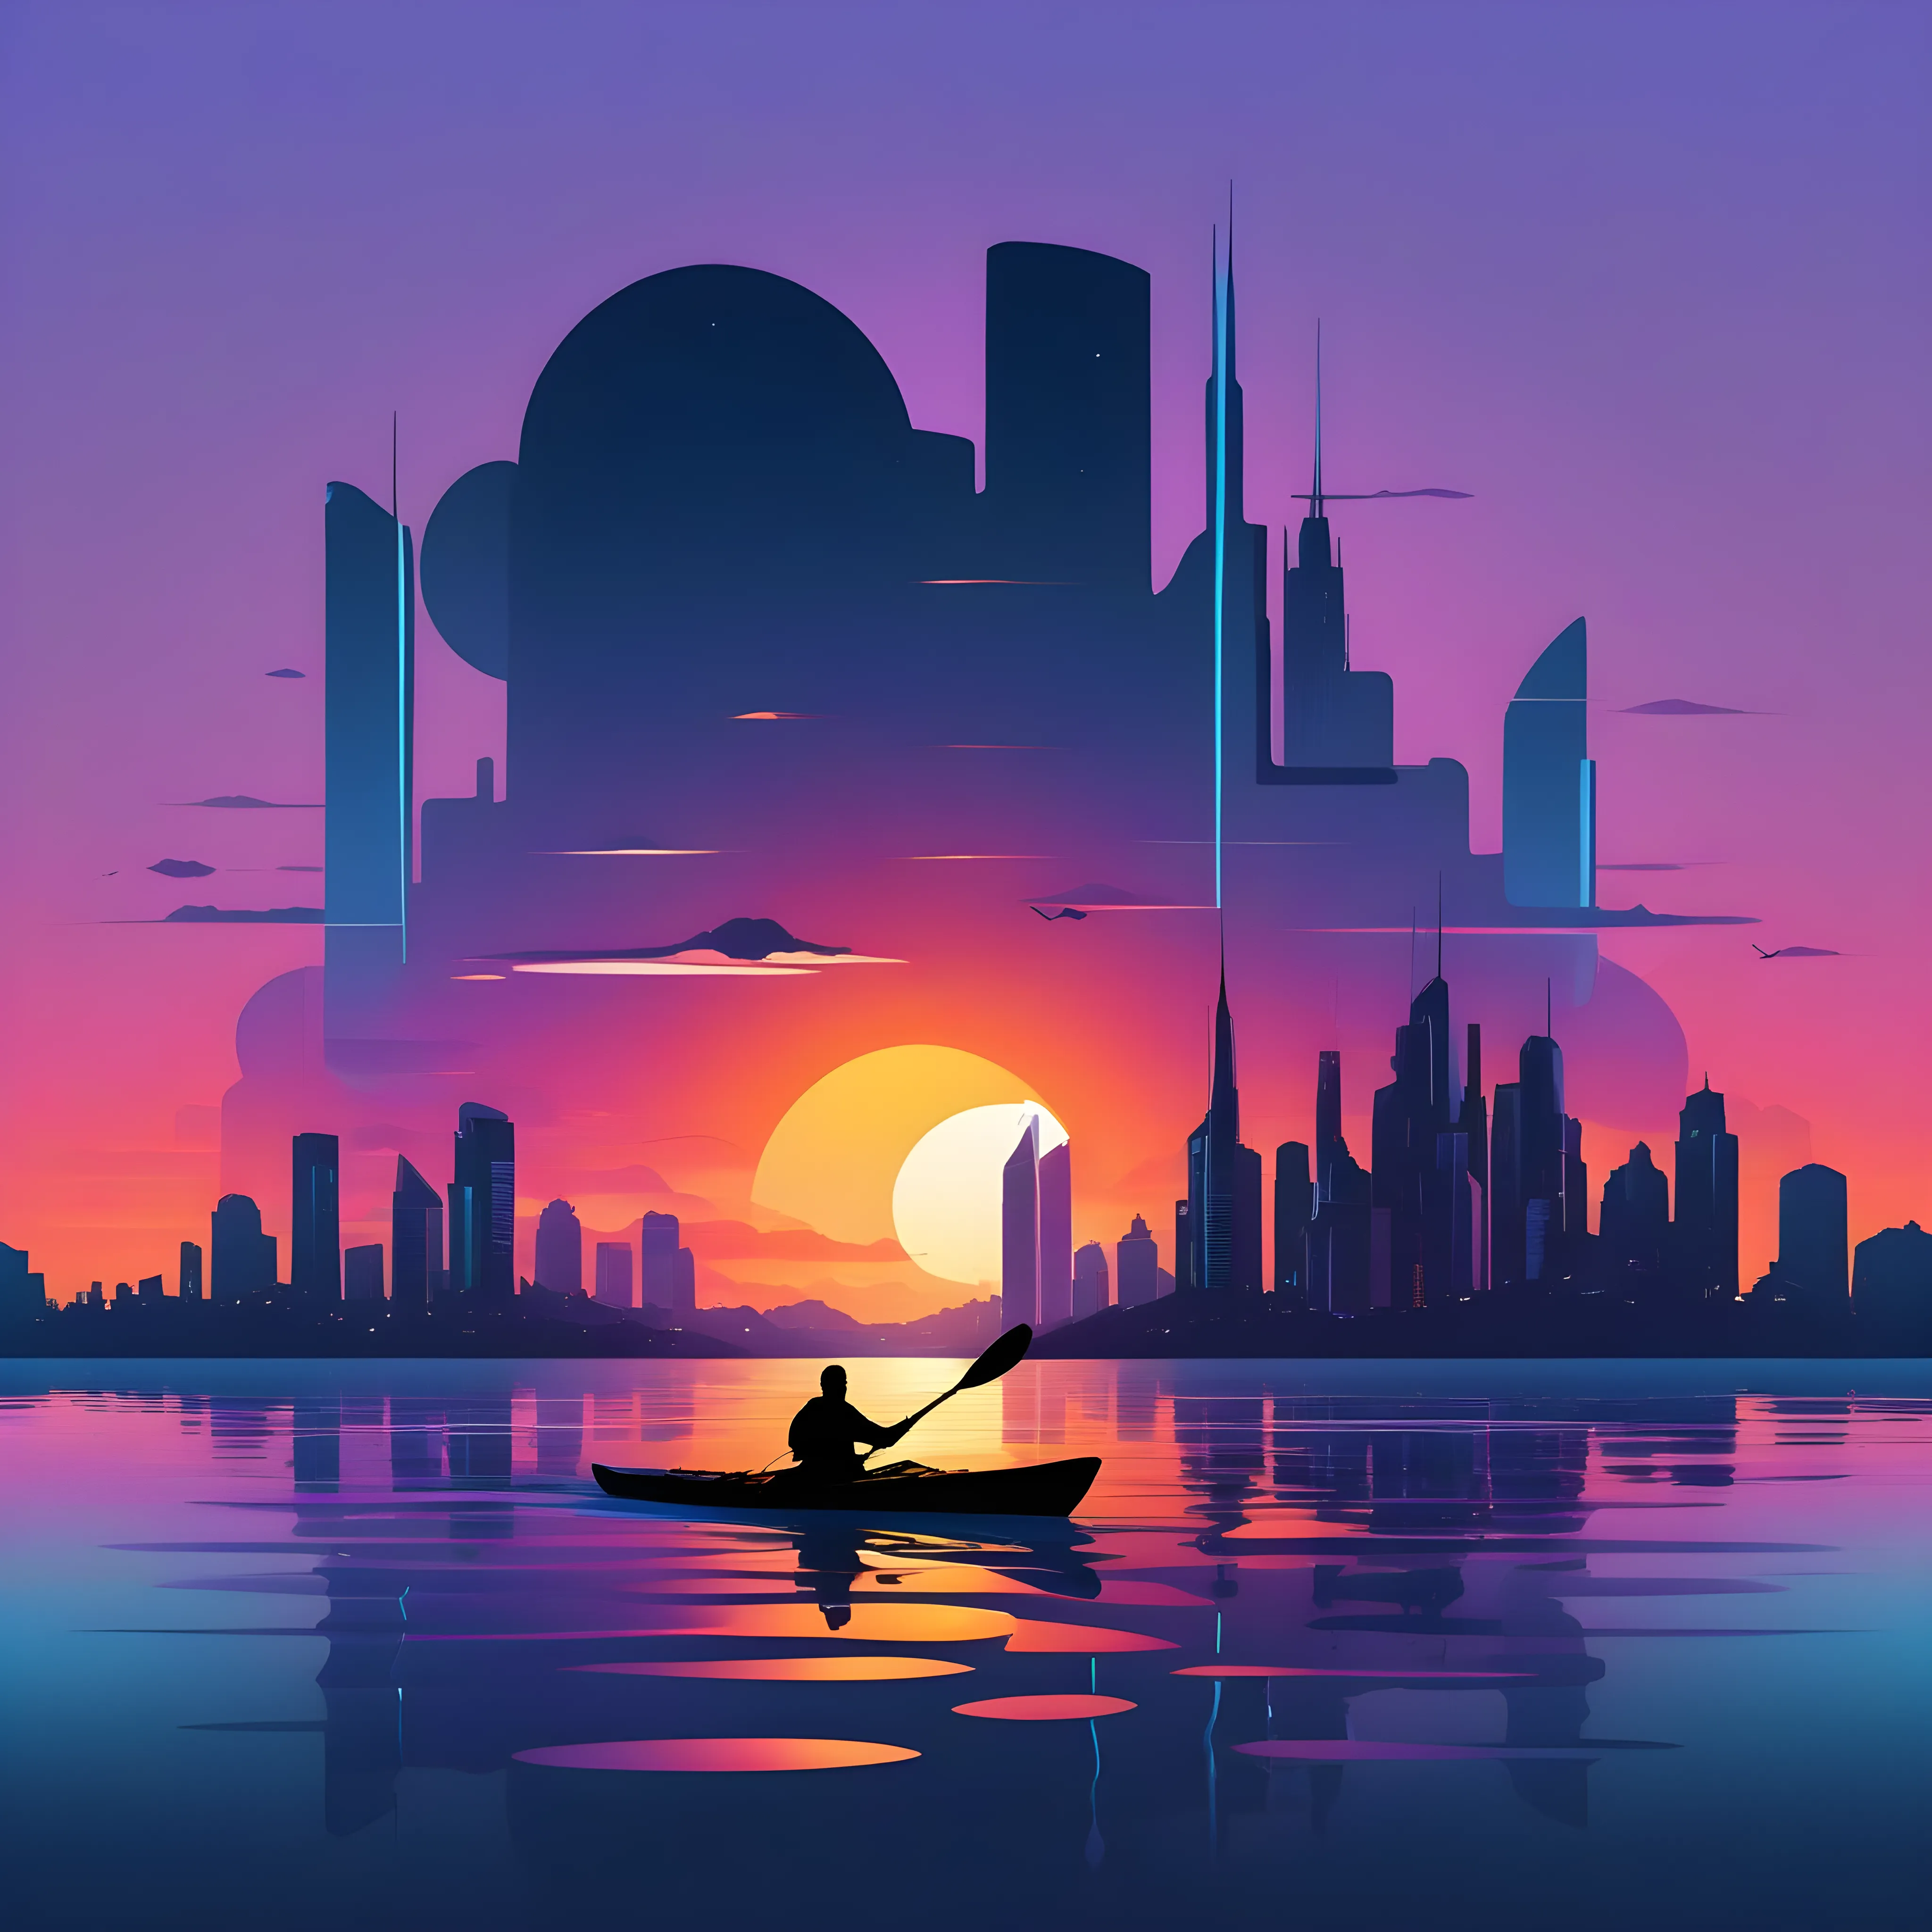 A picture of someone Kayaking on a lake in front of a futuristic city.